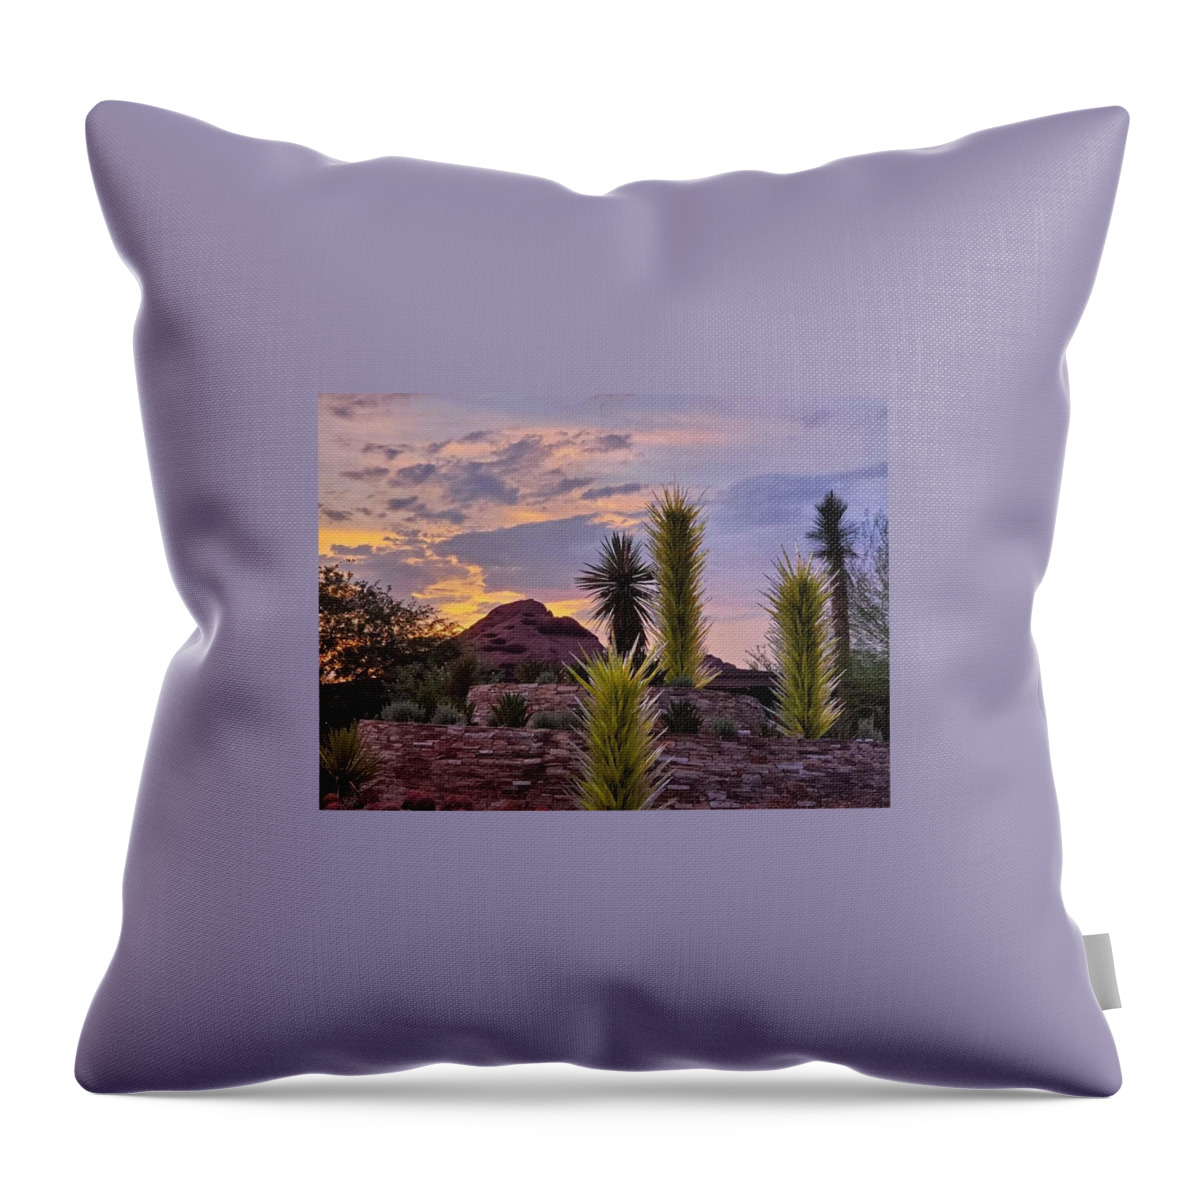 Orcinusfotograffy Throw Pillow featuring the photograph Unearthly by Kimo Fernandez